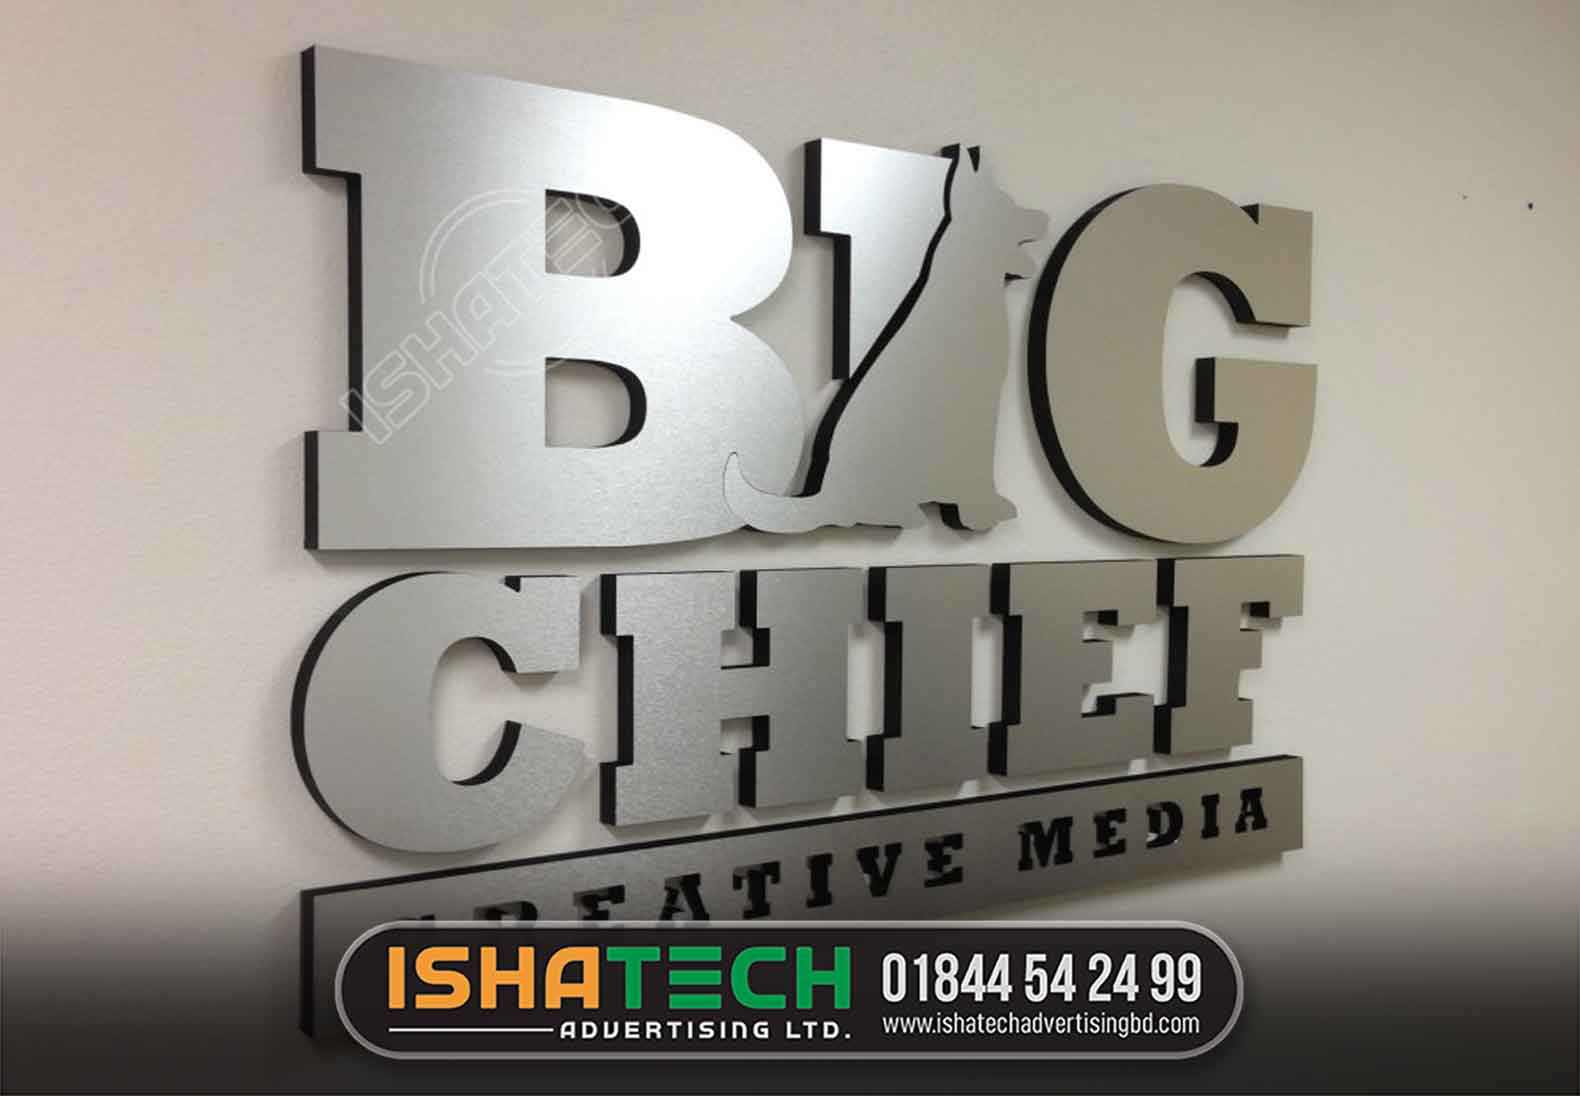 Modern Sign Making Company Office Signage, Hot Style Outdoor Advertising 3D Letters Stainless Steel Decorative Metal Alphabet Gold Sign Letters CREATE BY ISHATECH ADVERTISING LTD. THE LEADING SS LETTER SIGNAGE AGENCY IN DHAKA BD